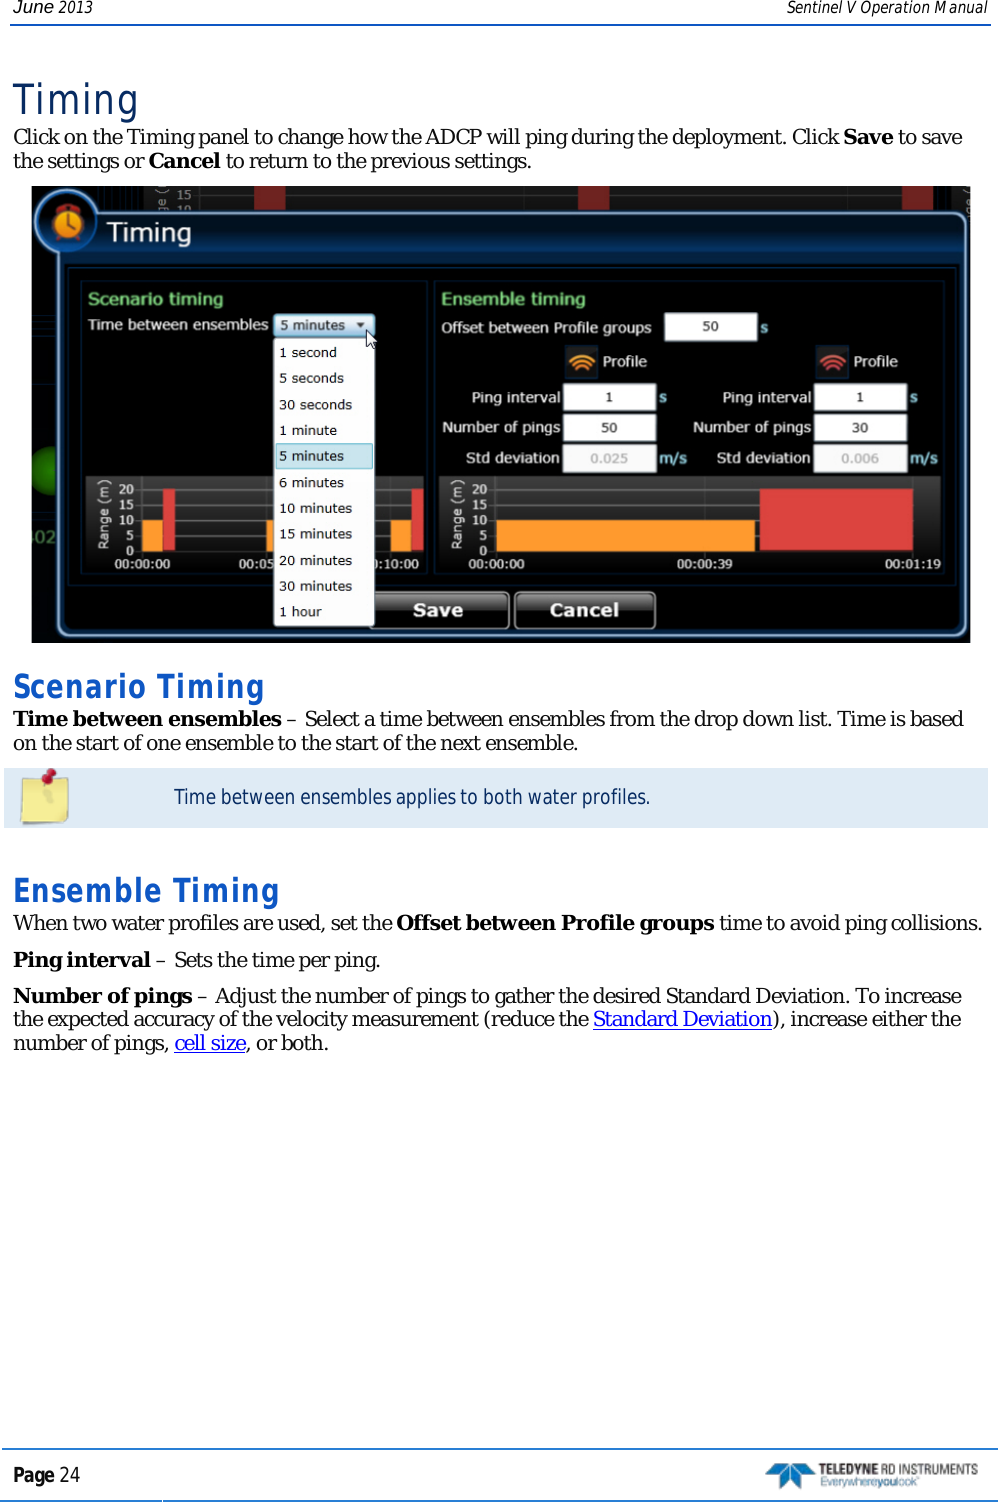 June 2013 Sentinel V Operation Manual Timing Click on the Timing panel to change how the ADCP will ping during the deployment. Click Save to save the settings or Cancel to return to the previous settings.  Scenario Timing Time between ensembles – Select a time between ensembles from the drop down list. Time is based on the start of one ensemble to the start of the next ensemble.  Time between ensembles applies to both water profiles.   Ensemble Timing When two water profiles are used, set the Offset between Profile groups time to avoid ping collisions. Ping interval – Sets the time per ping.  Number of pings – Adjust the number of pings to gather the desired Standard Deviation. To increase the expected accuracy of the velocity measurement (reduce the Standard Deviation), increase either the number of pings, cell size, or both.  Page 24   